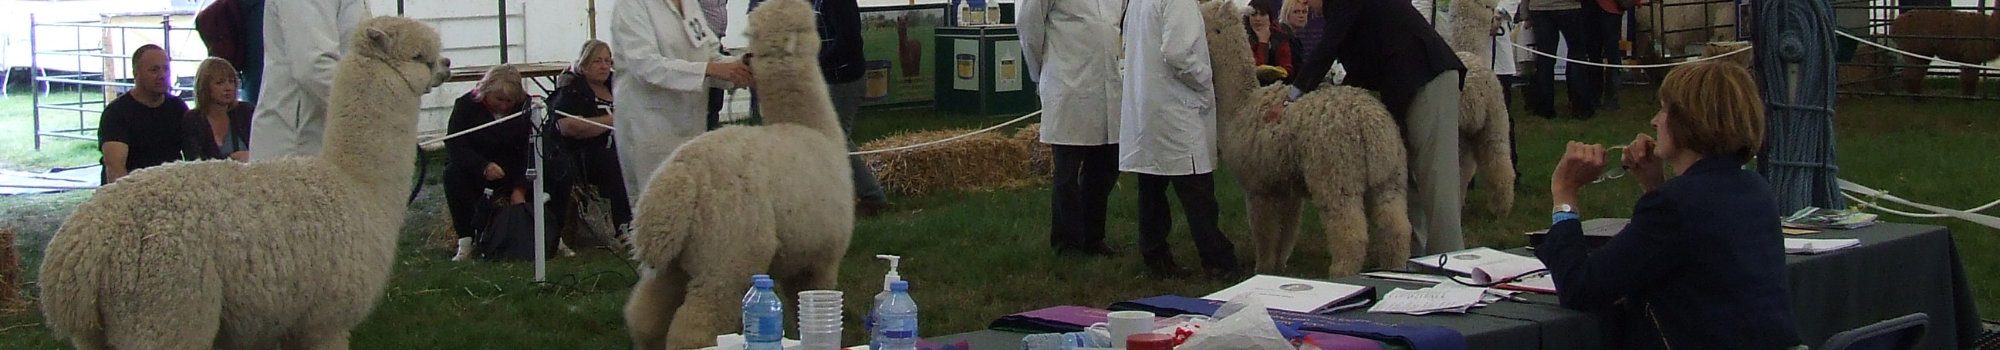 Alpaca shows and events